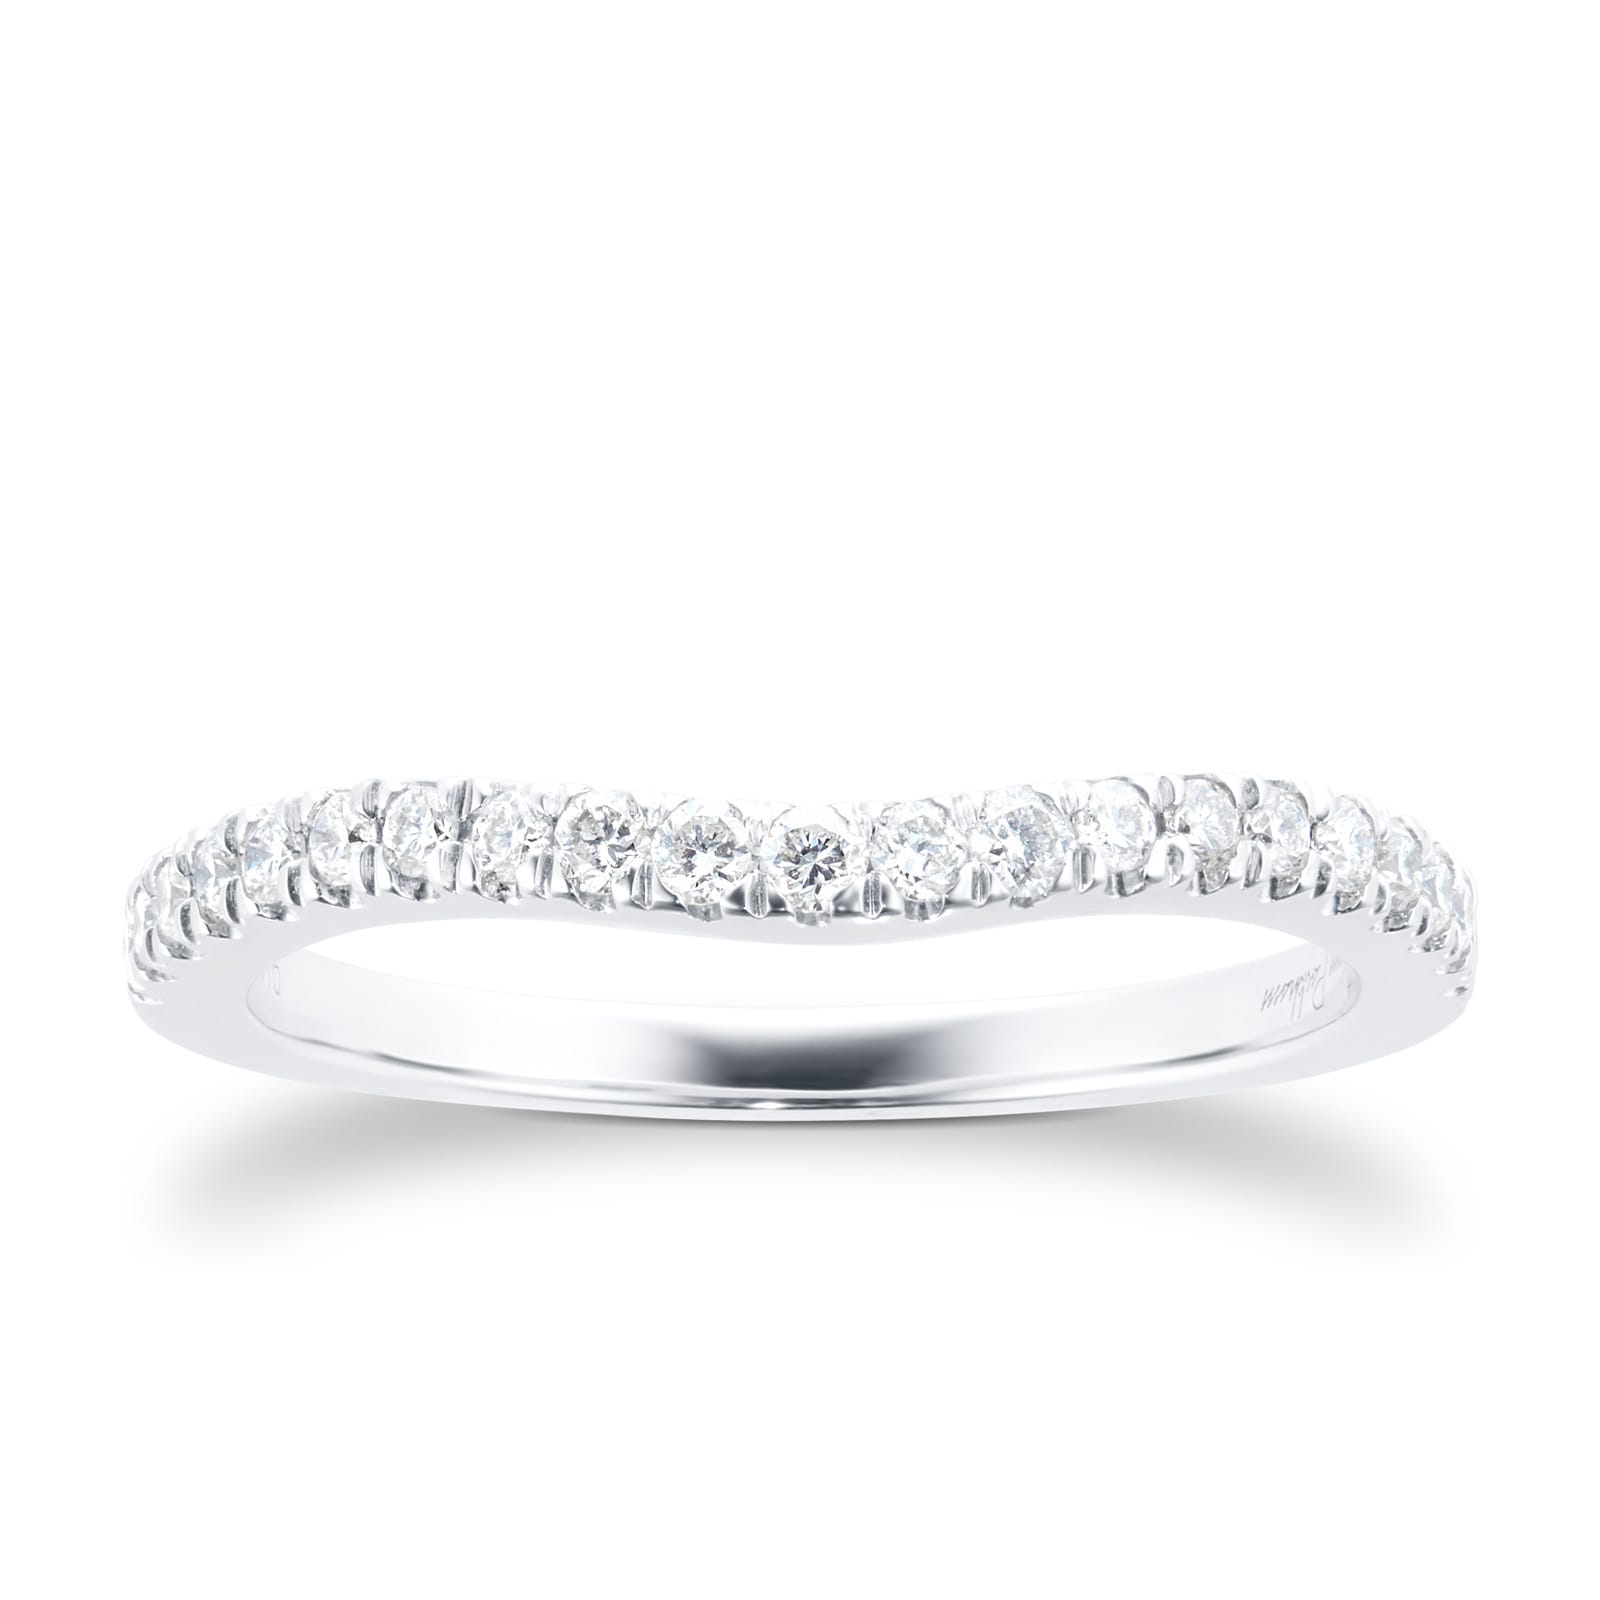 Brilliant Cut 0.23 Carat Total Weight Contour Wedding Ring In 18 Carat White Gold - Ring Size Q